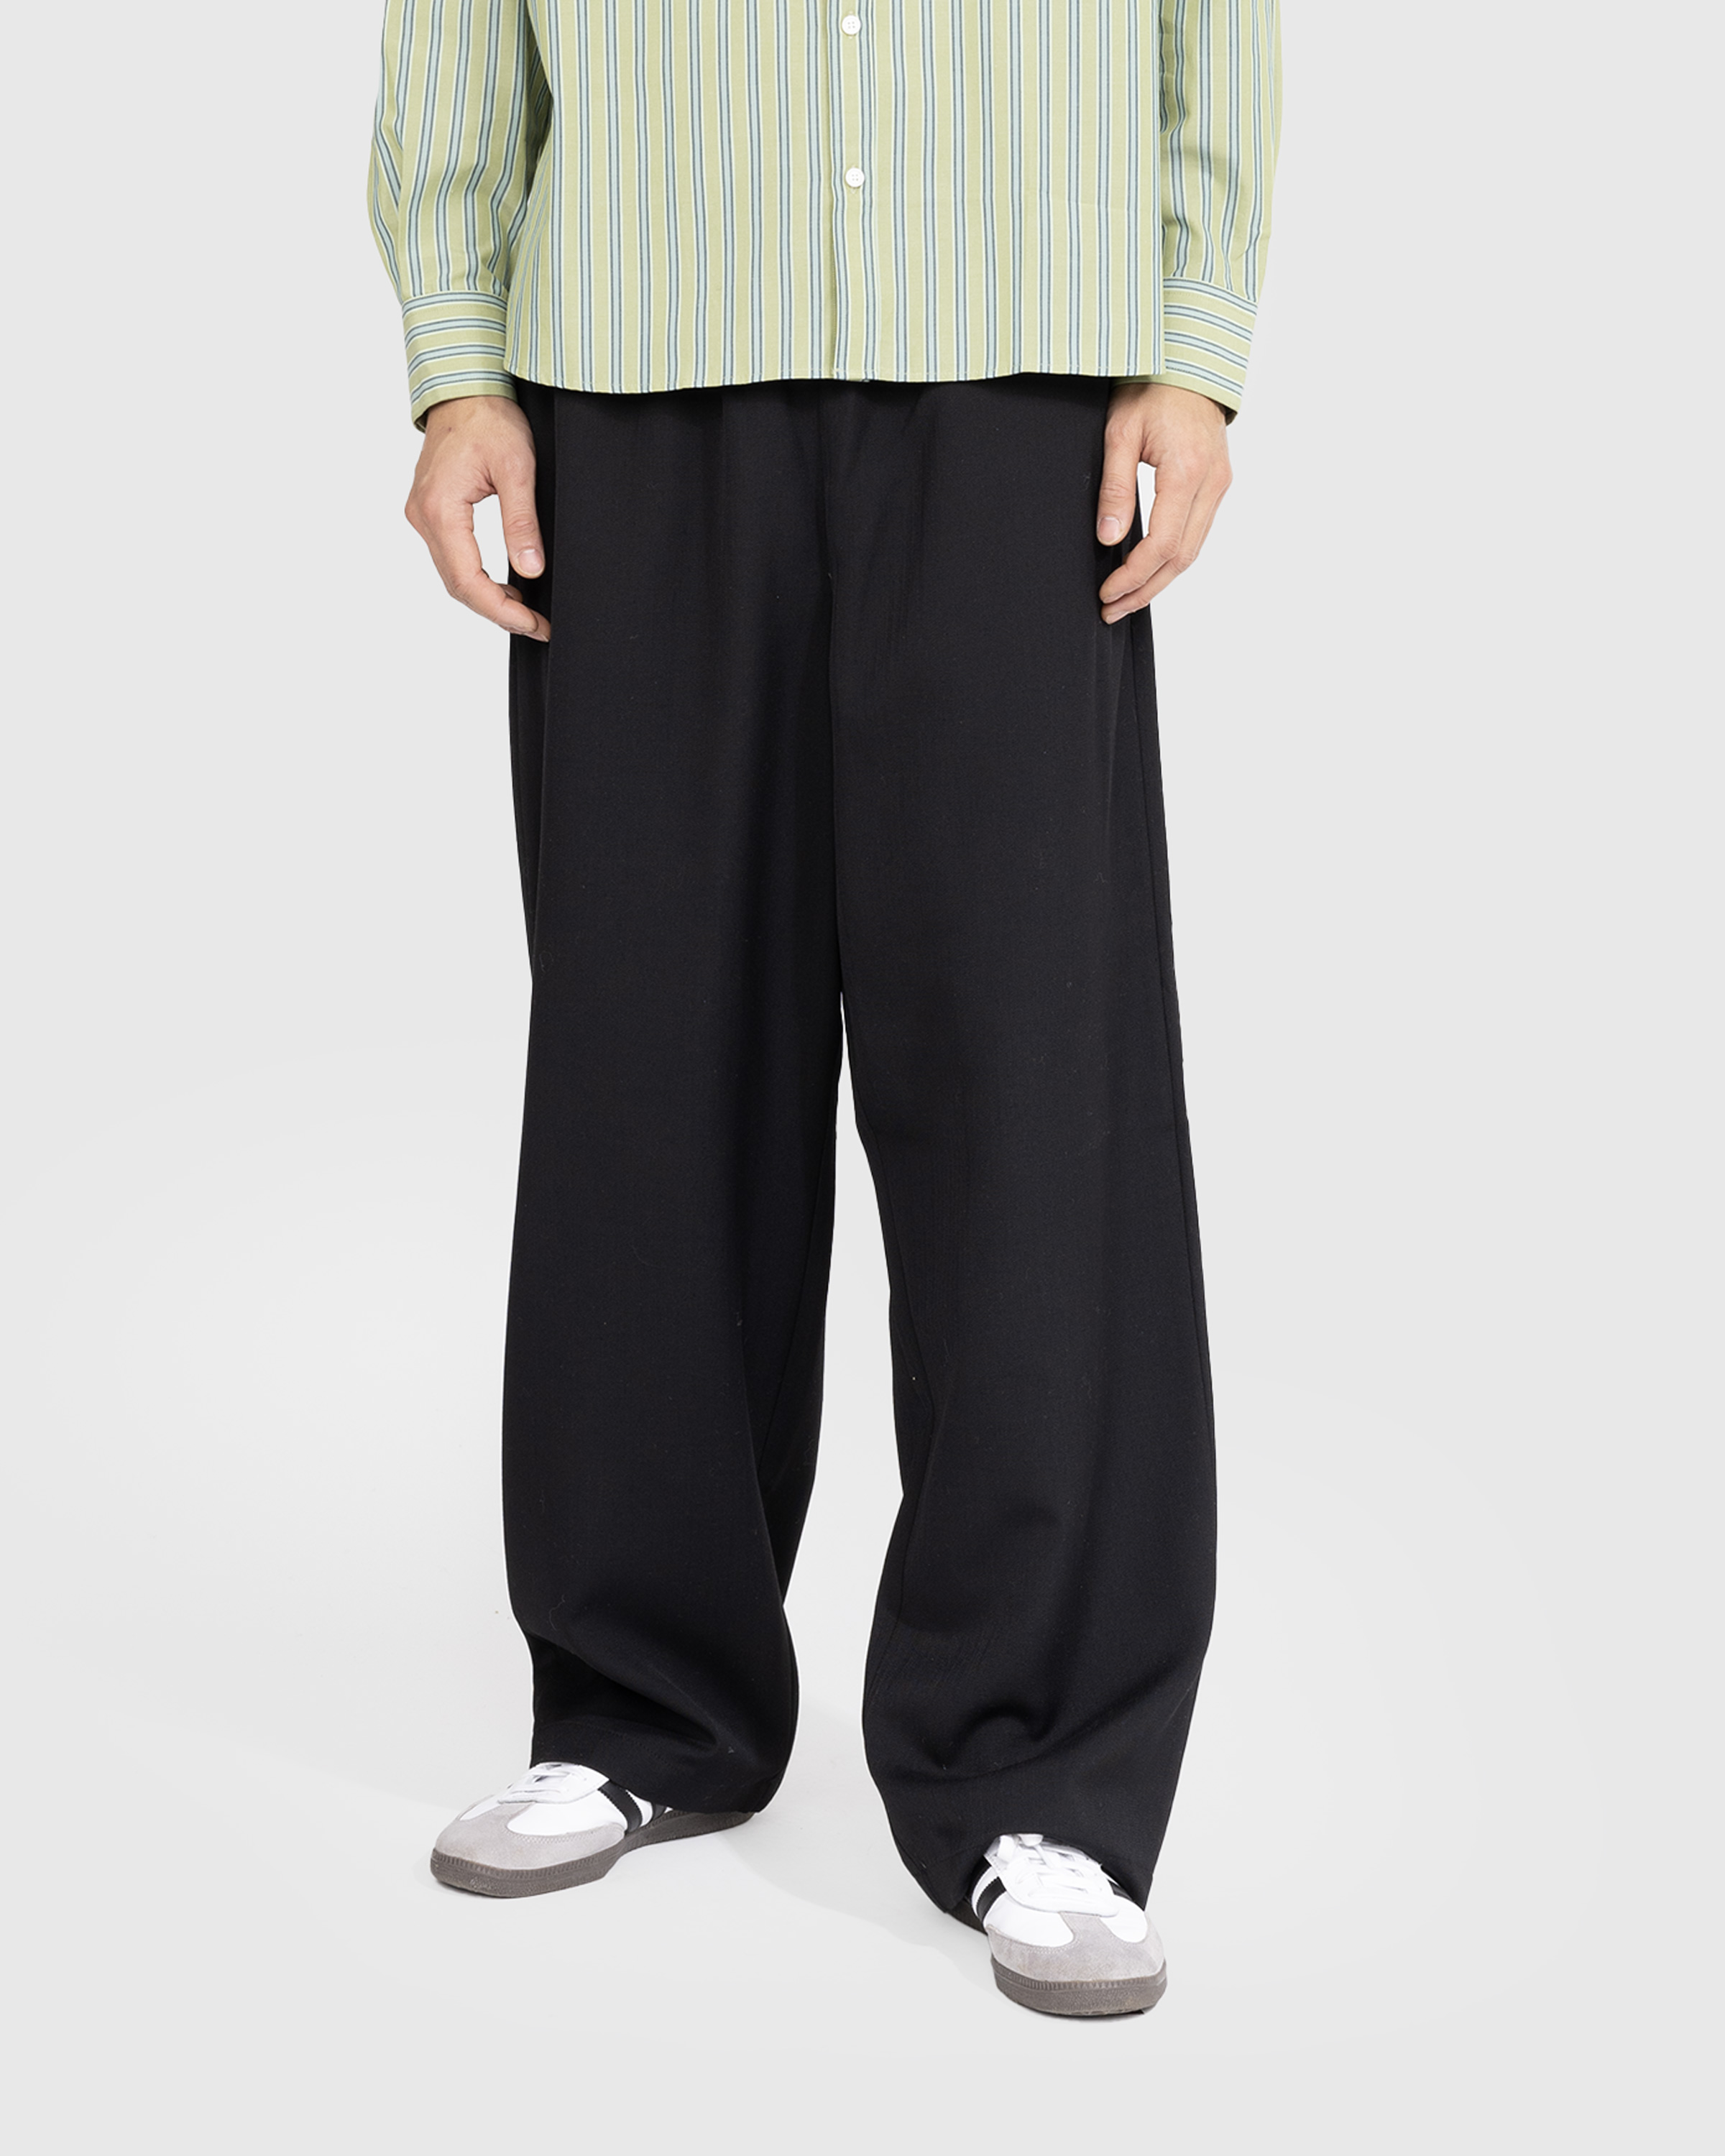 Acne Studios - Tailored Trousers Black - Clothing - Black - Image 2